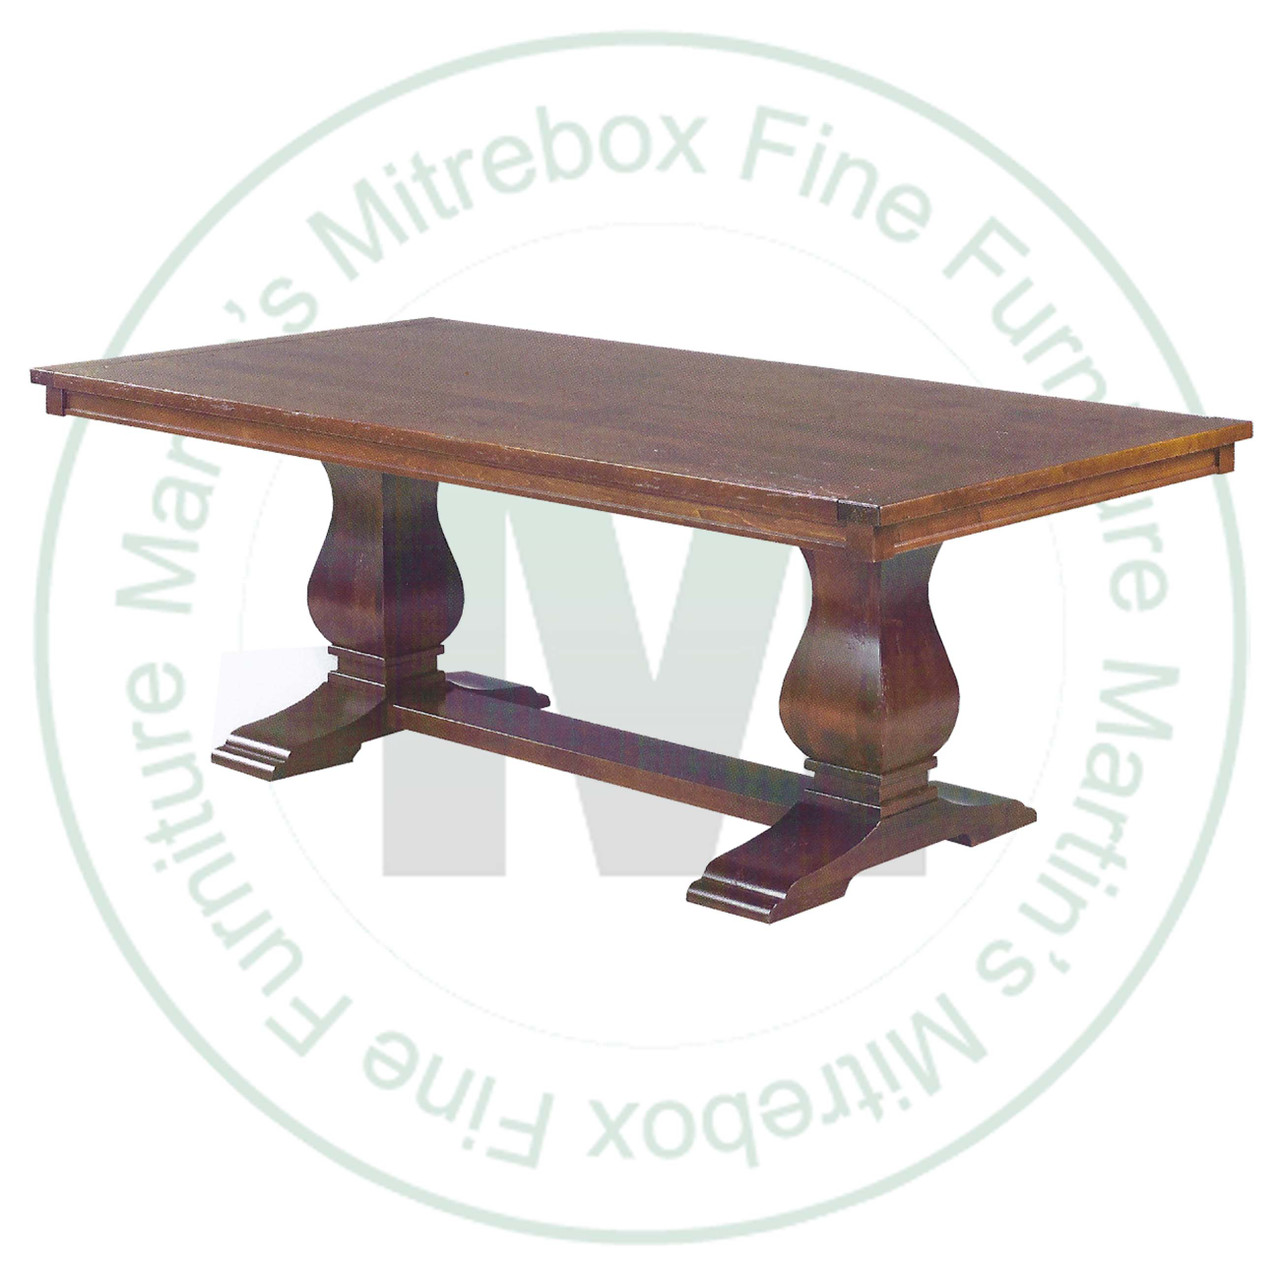 Wormy Maple Socrates Double Pedestal Table 48''D x 66''W x 30''H With 2 - 12'' Leaves. Table Has 1.25'' Thick Top